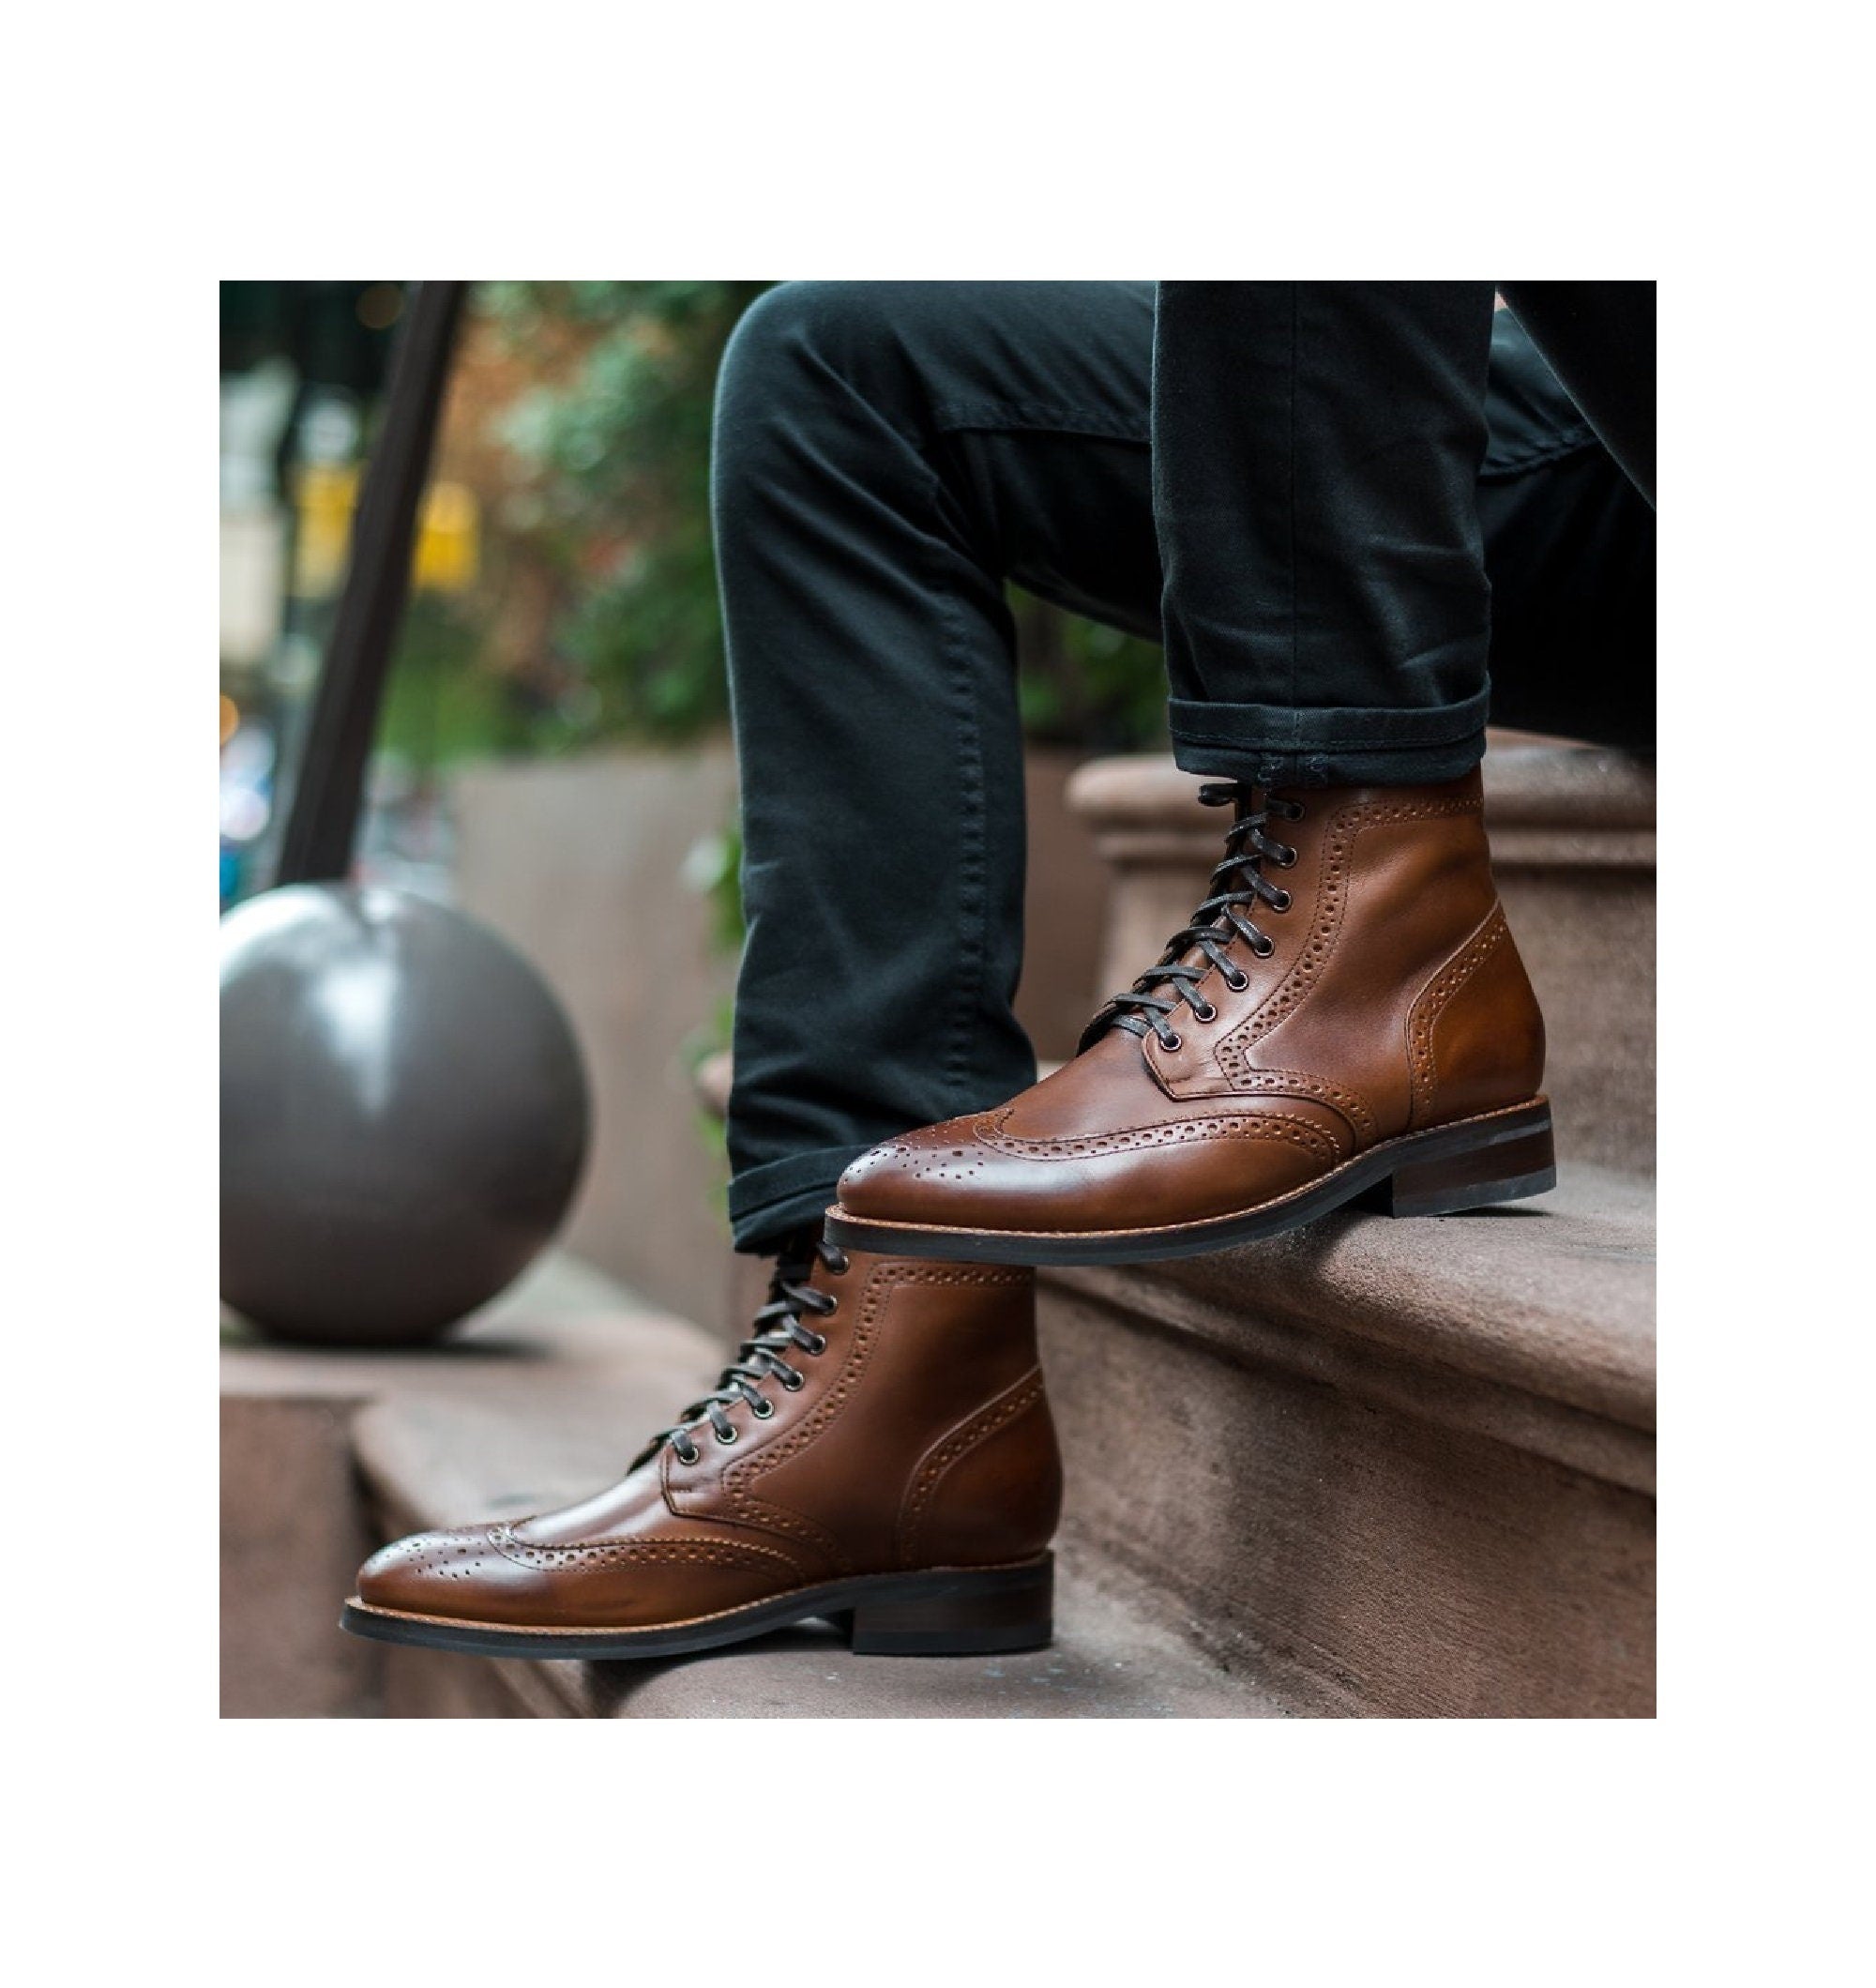 Handmade full-brogue wingtip leather boots, men high ankle boots